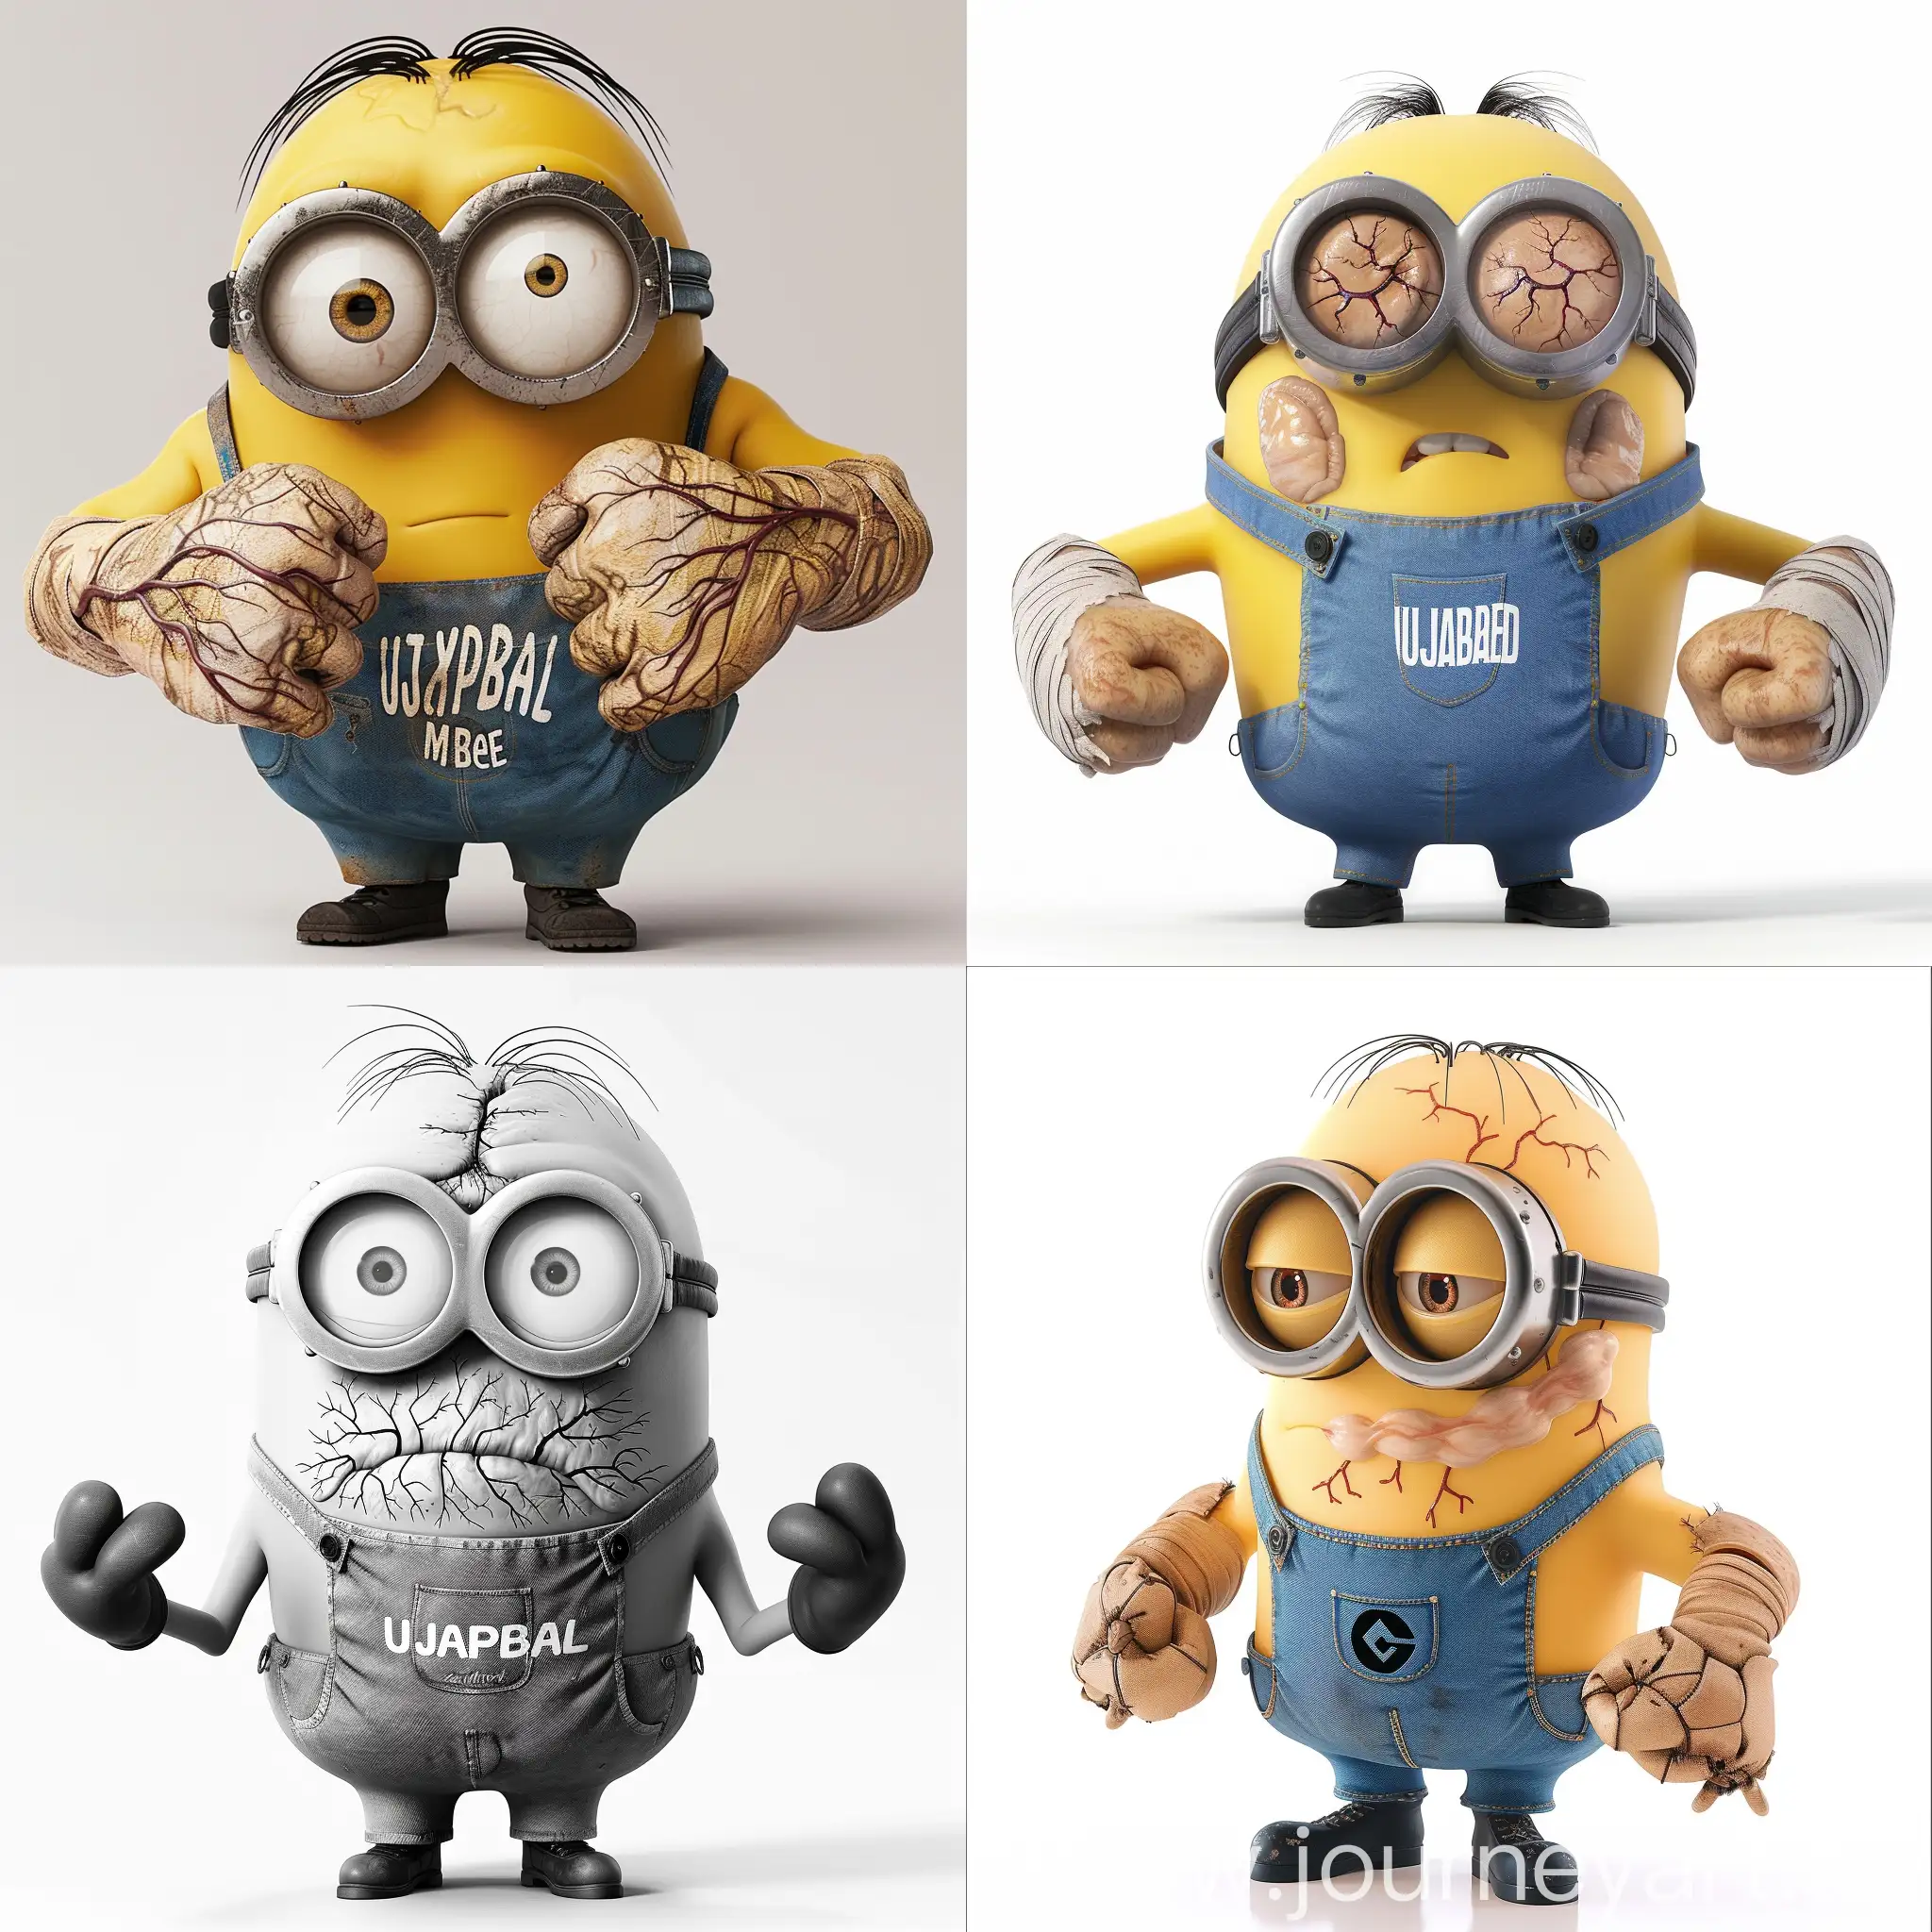 Buff-Minion-with-Veiny-Hands-in-ujaplqwnbald-TShirt